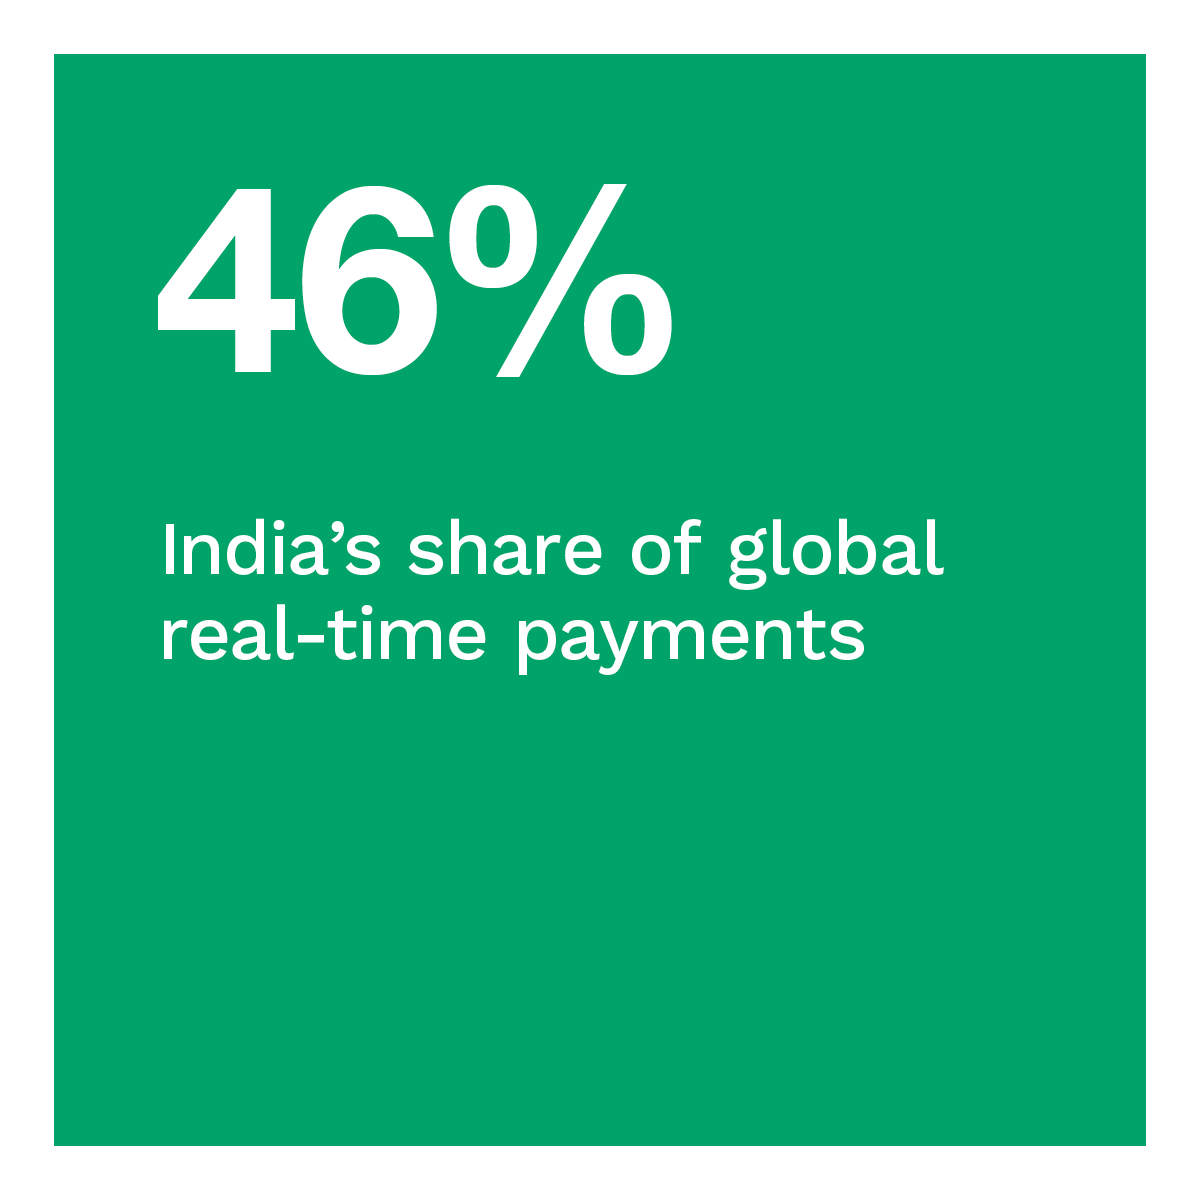 46%: India’s share of global real-time payments